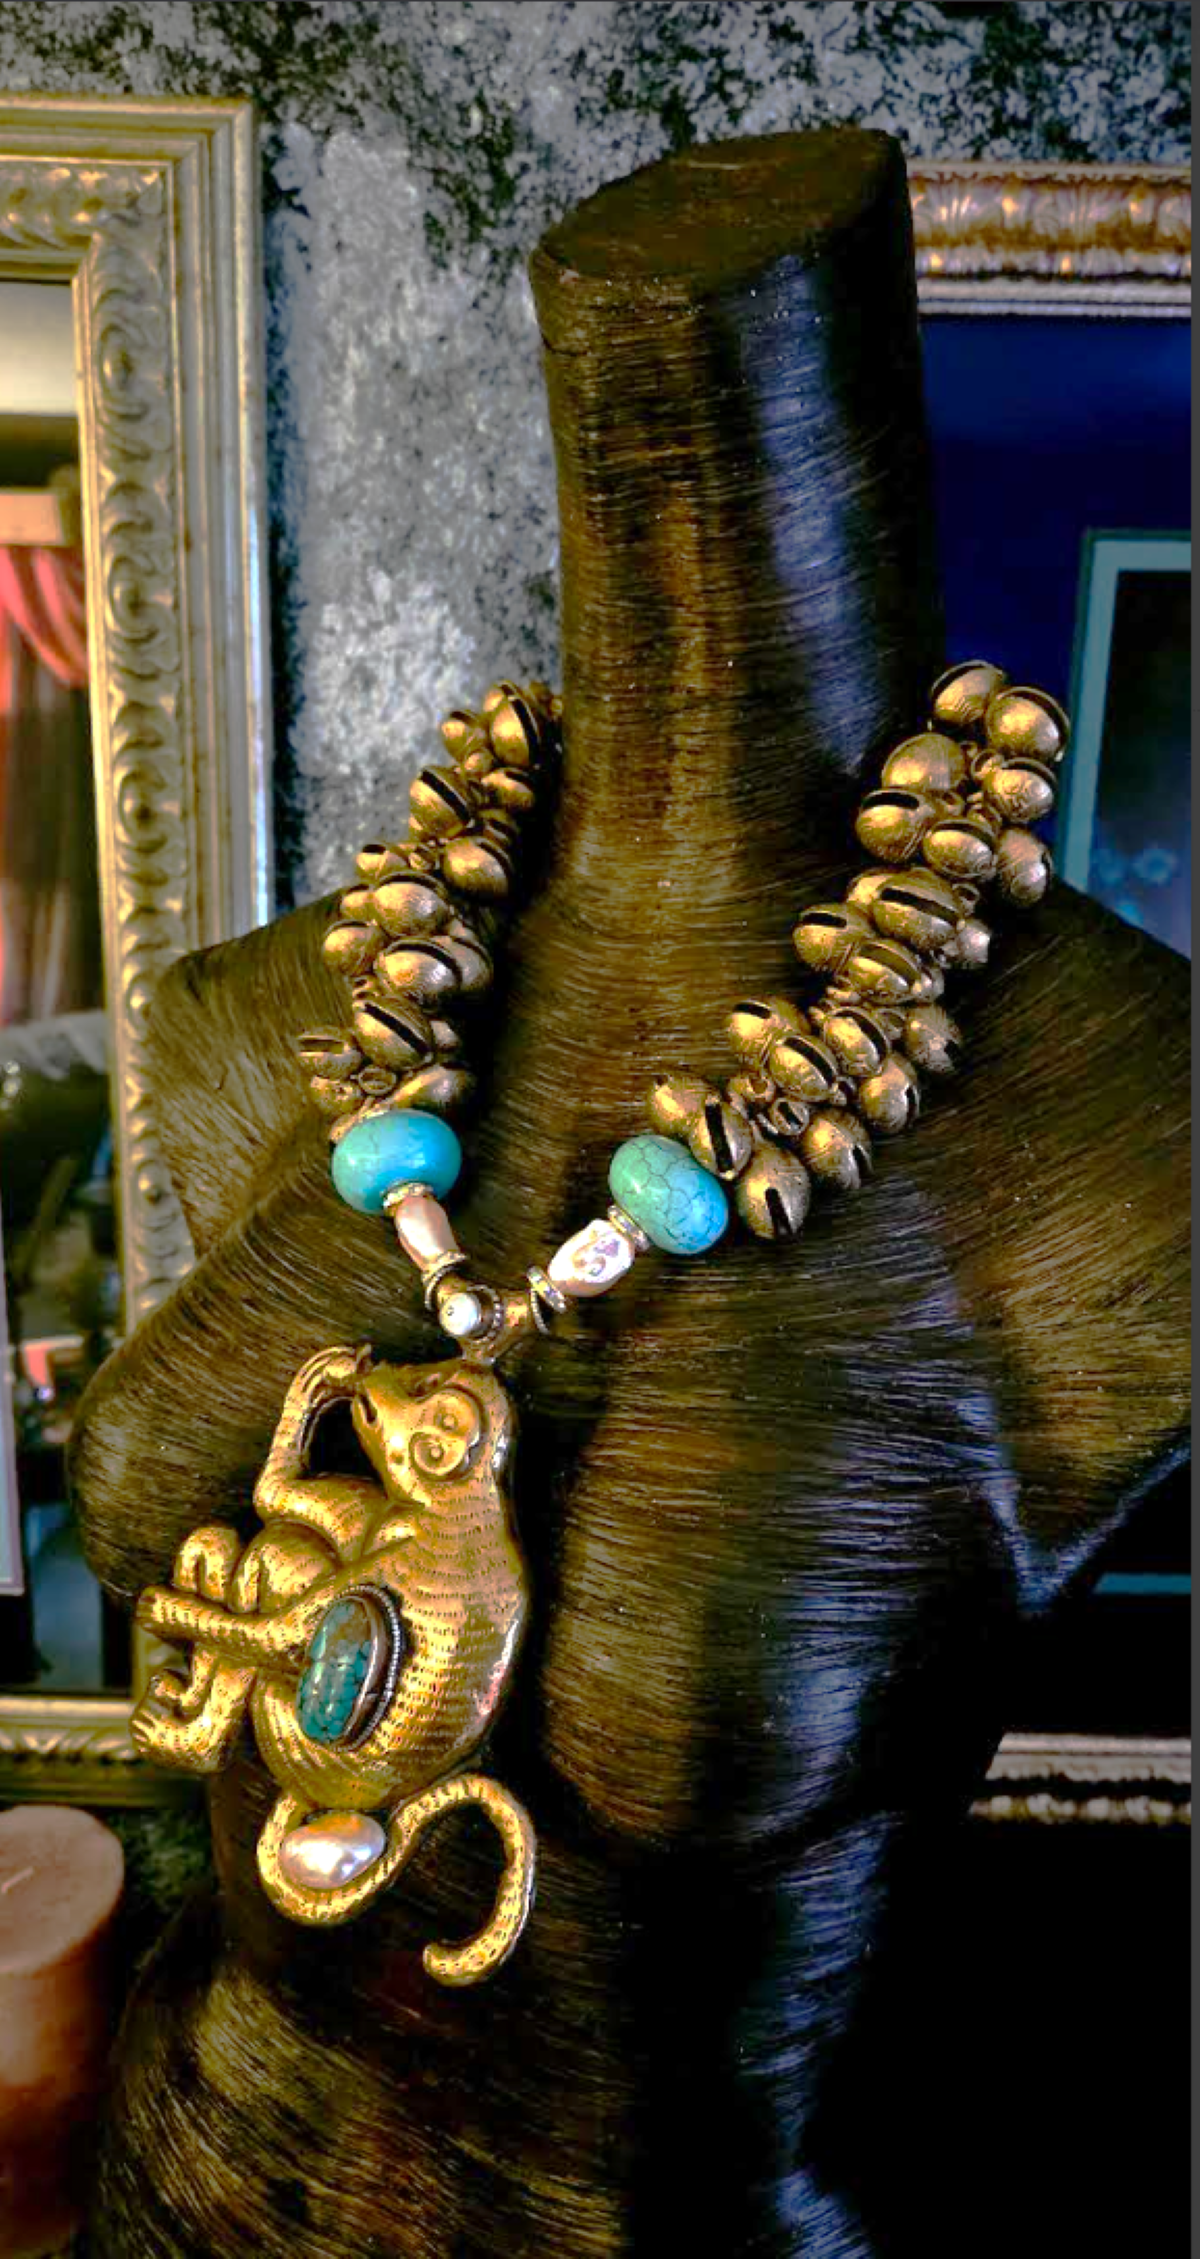 Asian Brass Chime Statement Necklace - Rare Brass Repousse Monkey Pendant Chest Piece -  Heavy Haute Couture Neck Candy - Kat Kouture Jewelry